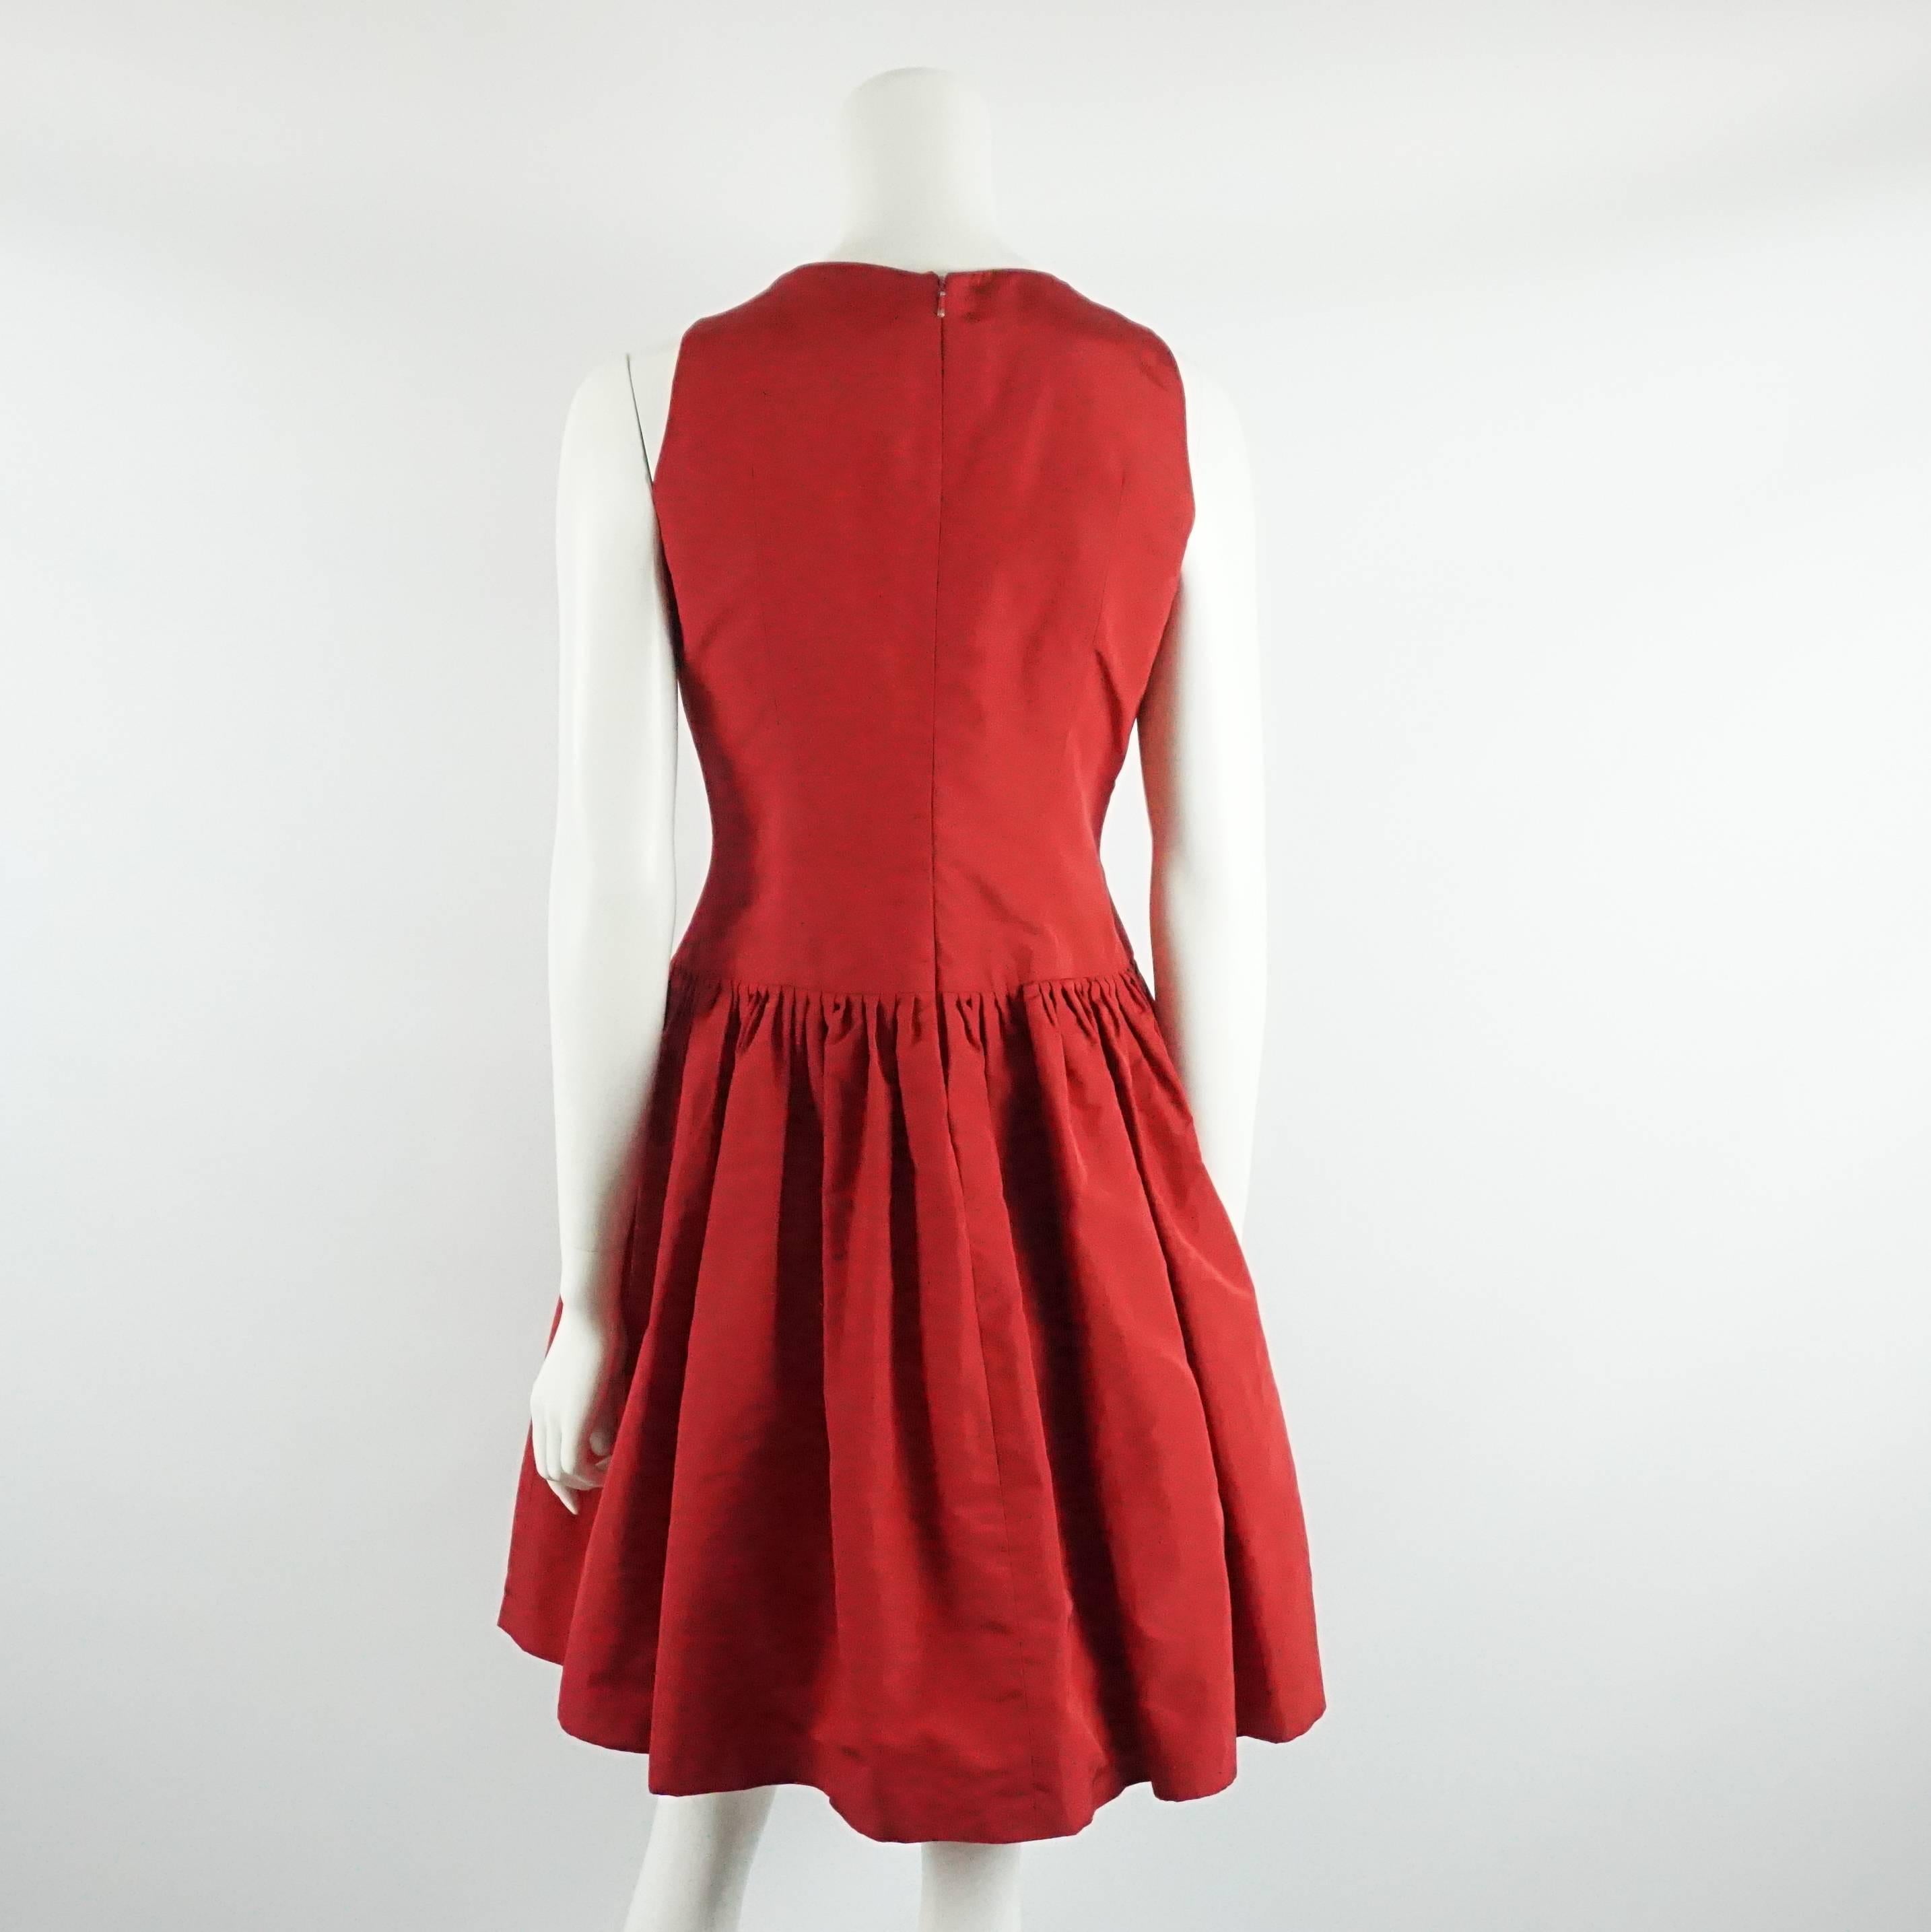 Oscar de la Renta Red Silk Taffeta Dress with Rose Detail - 6 In Excellent Condition For Sale In West Palm Beach, FL